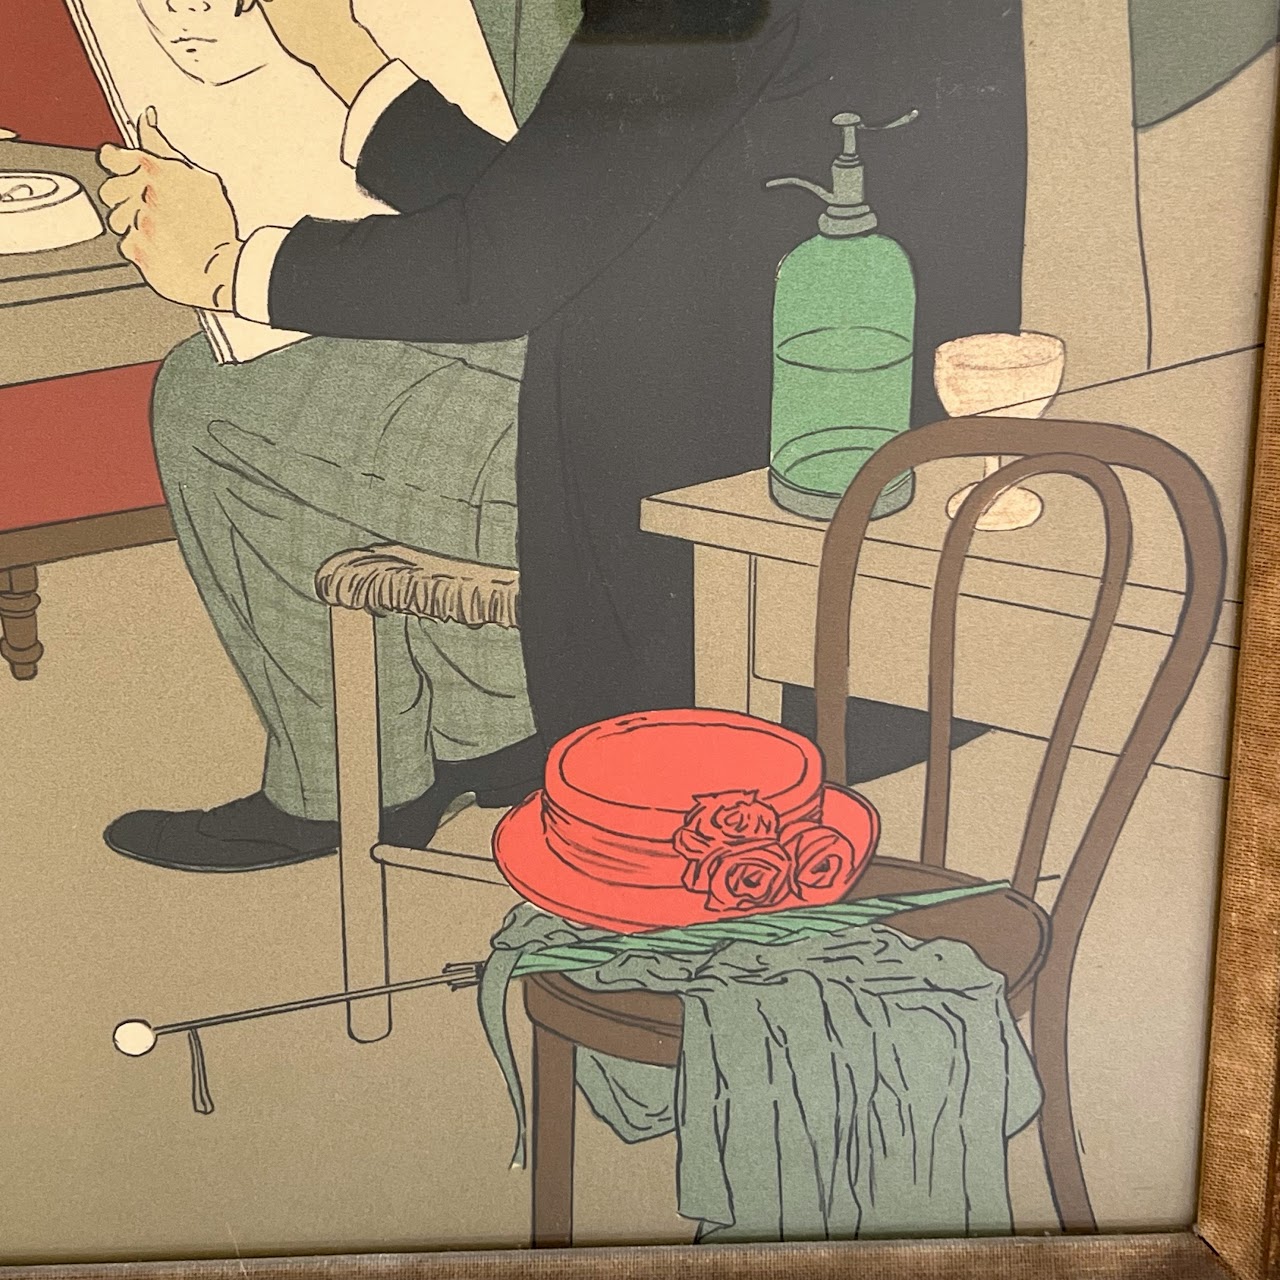 Philippe Henri Noyer 'Toulouse-Lautrec at Work' Signed Lithograph